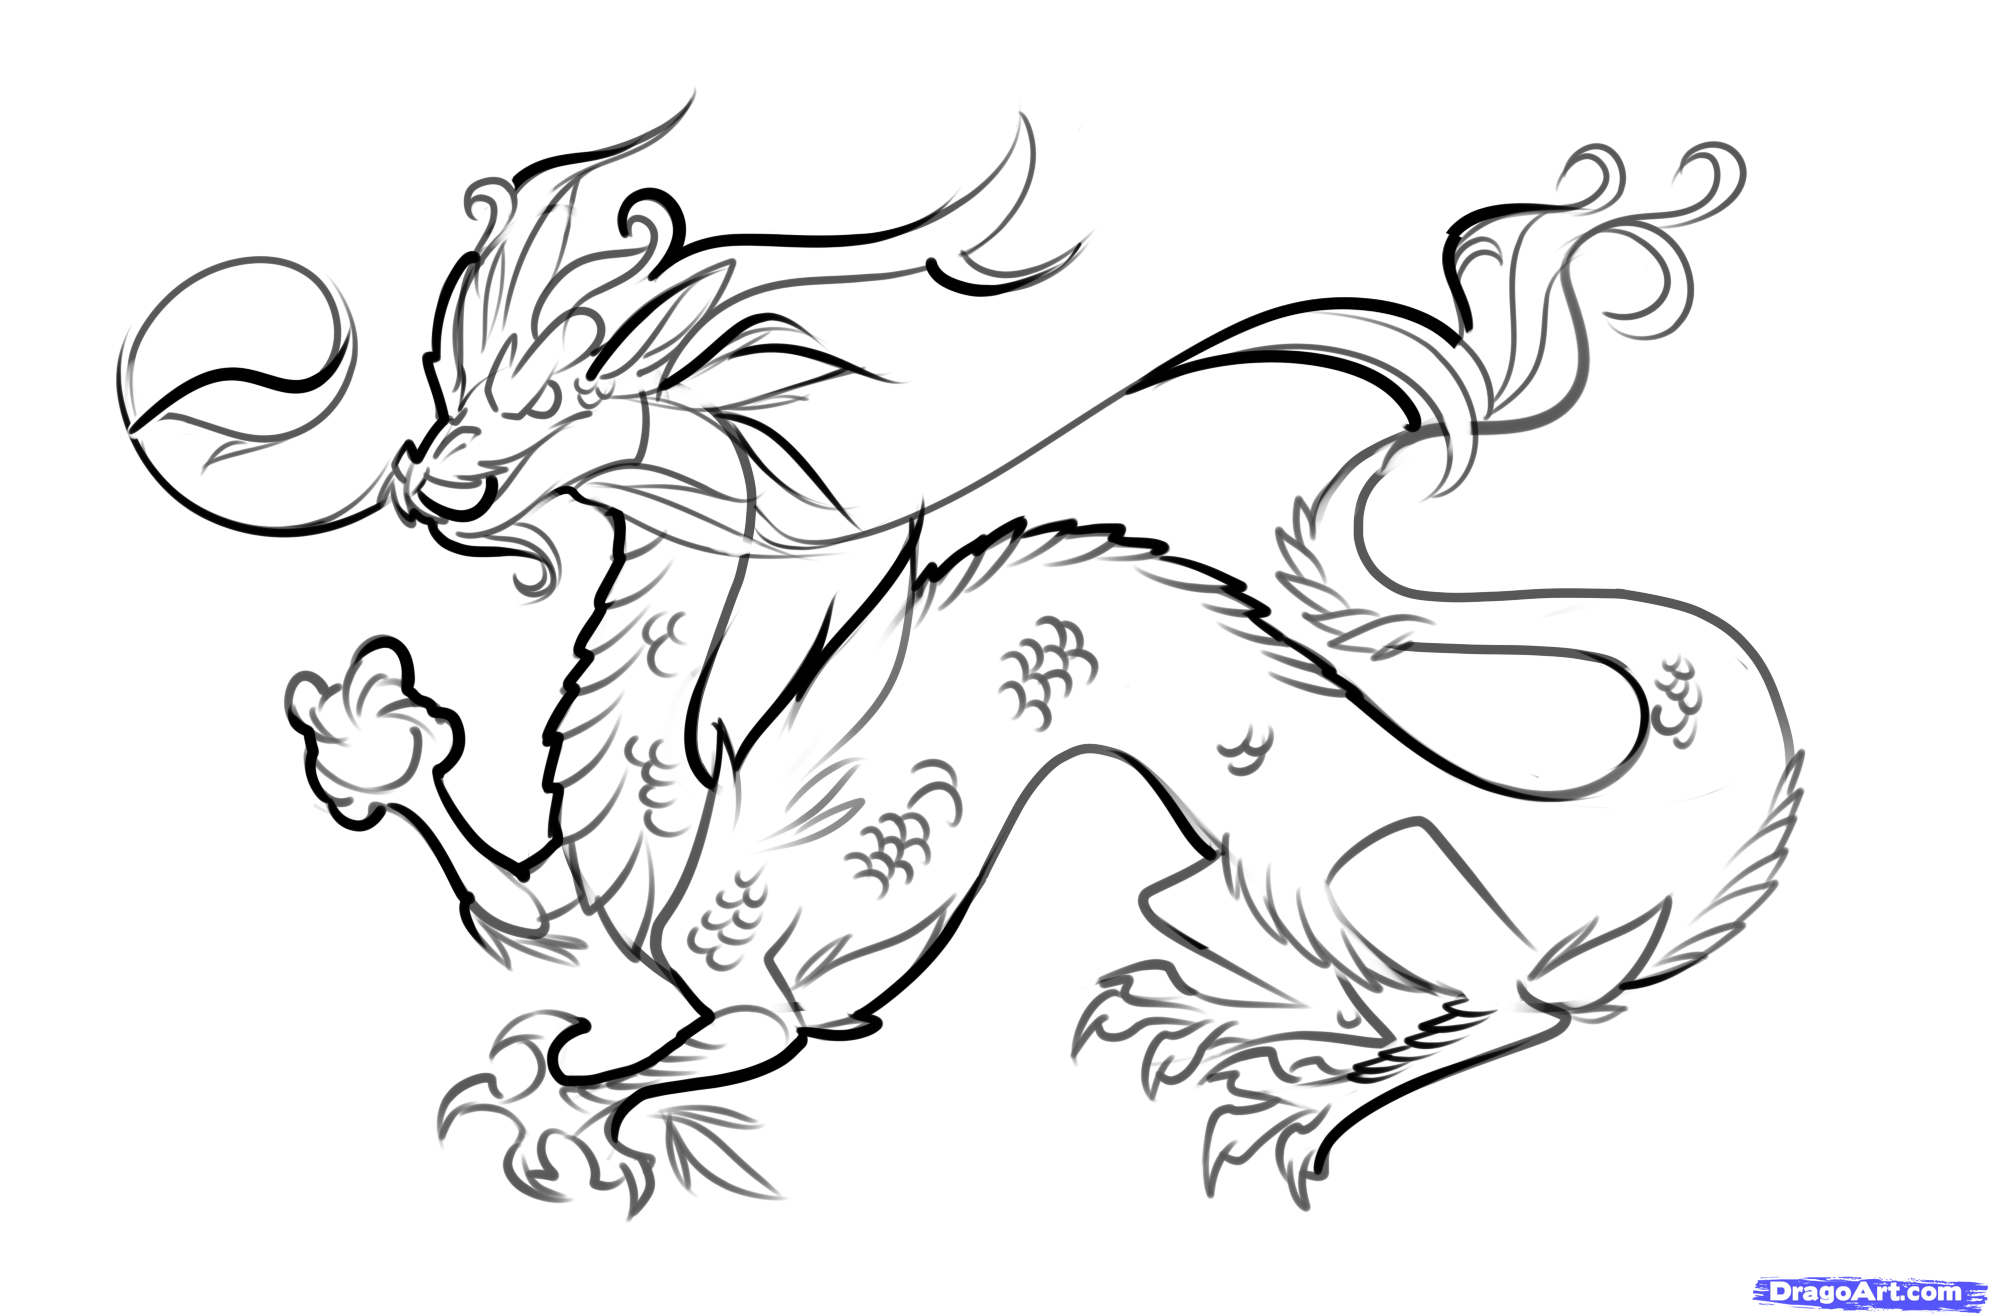 chinese dragon clipart coloring